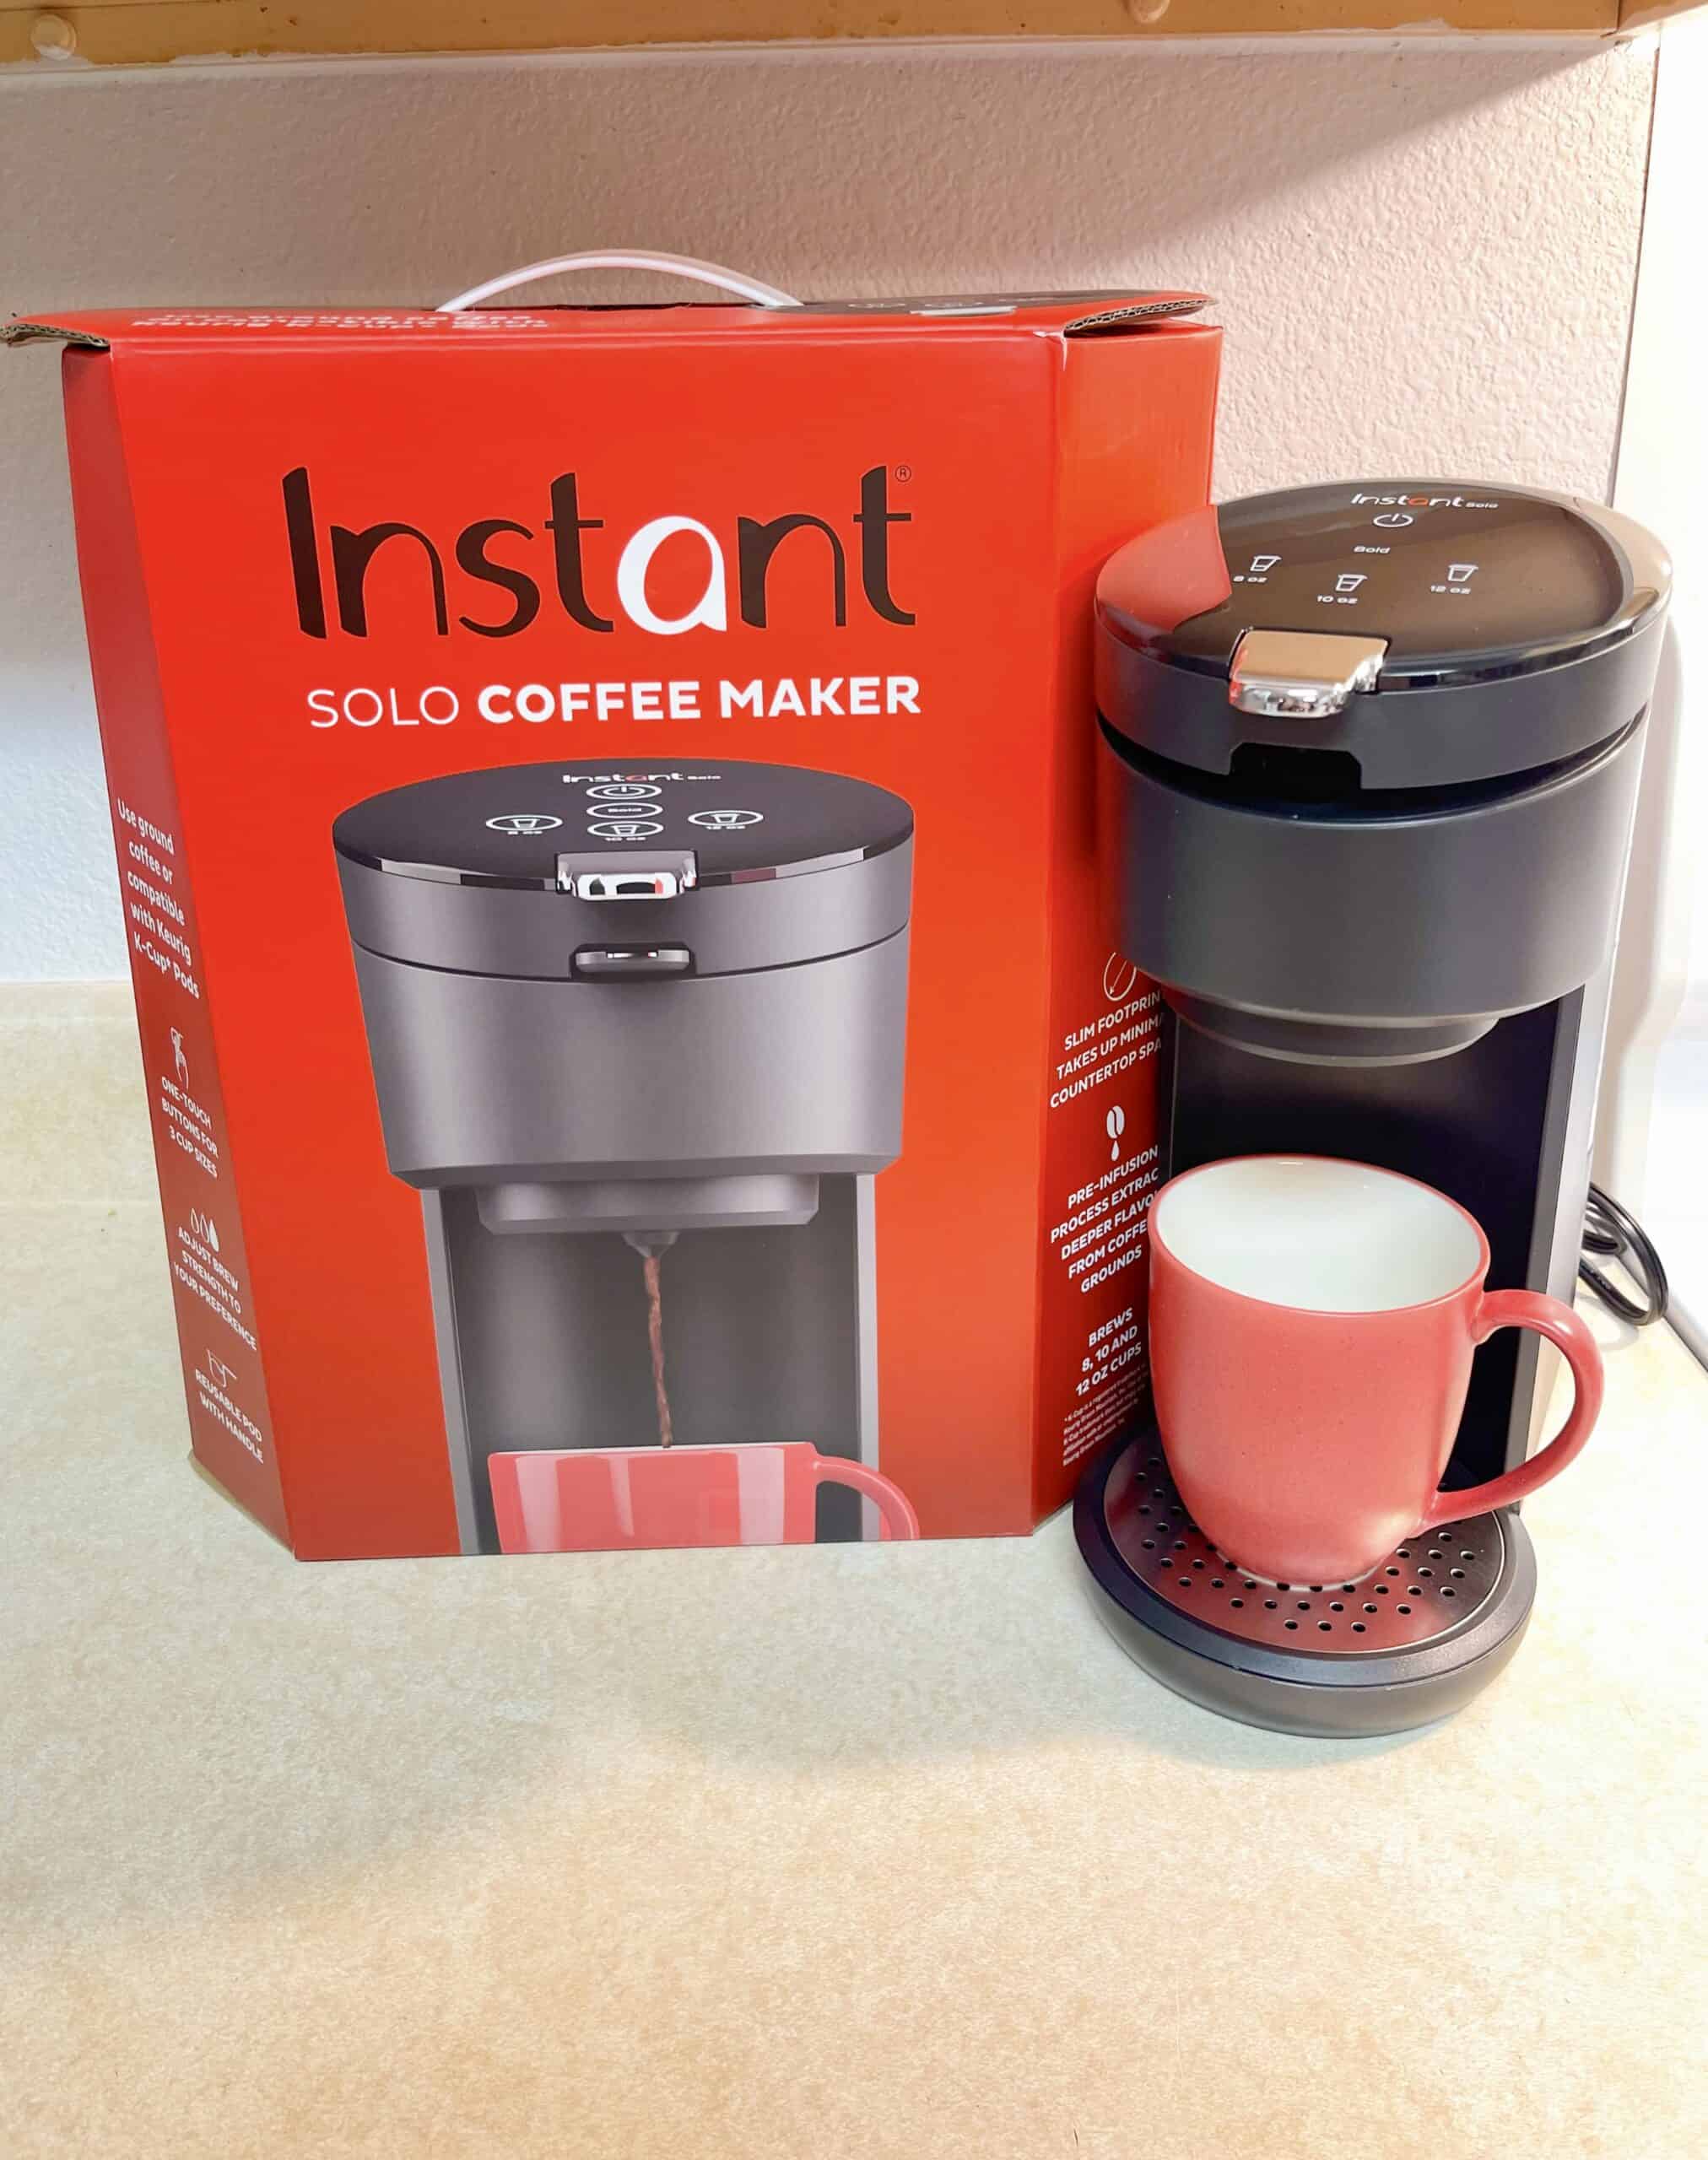 Instant Solo Single Serve Coffee Maker, mother's day gift idea